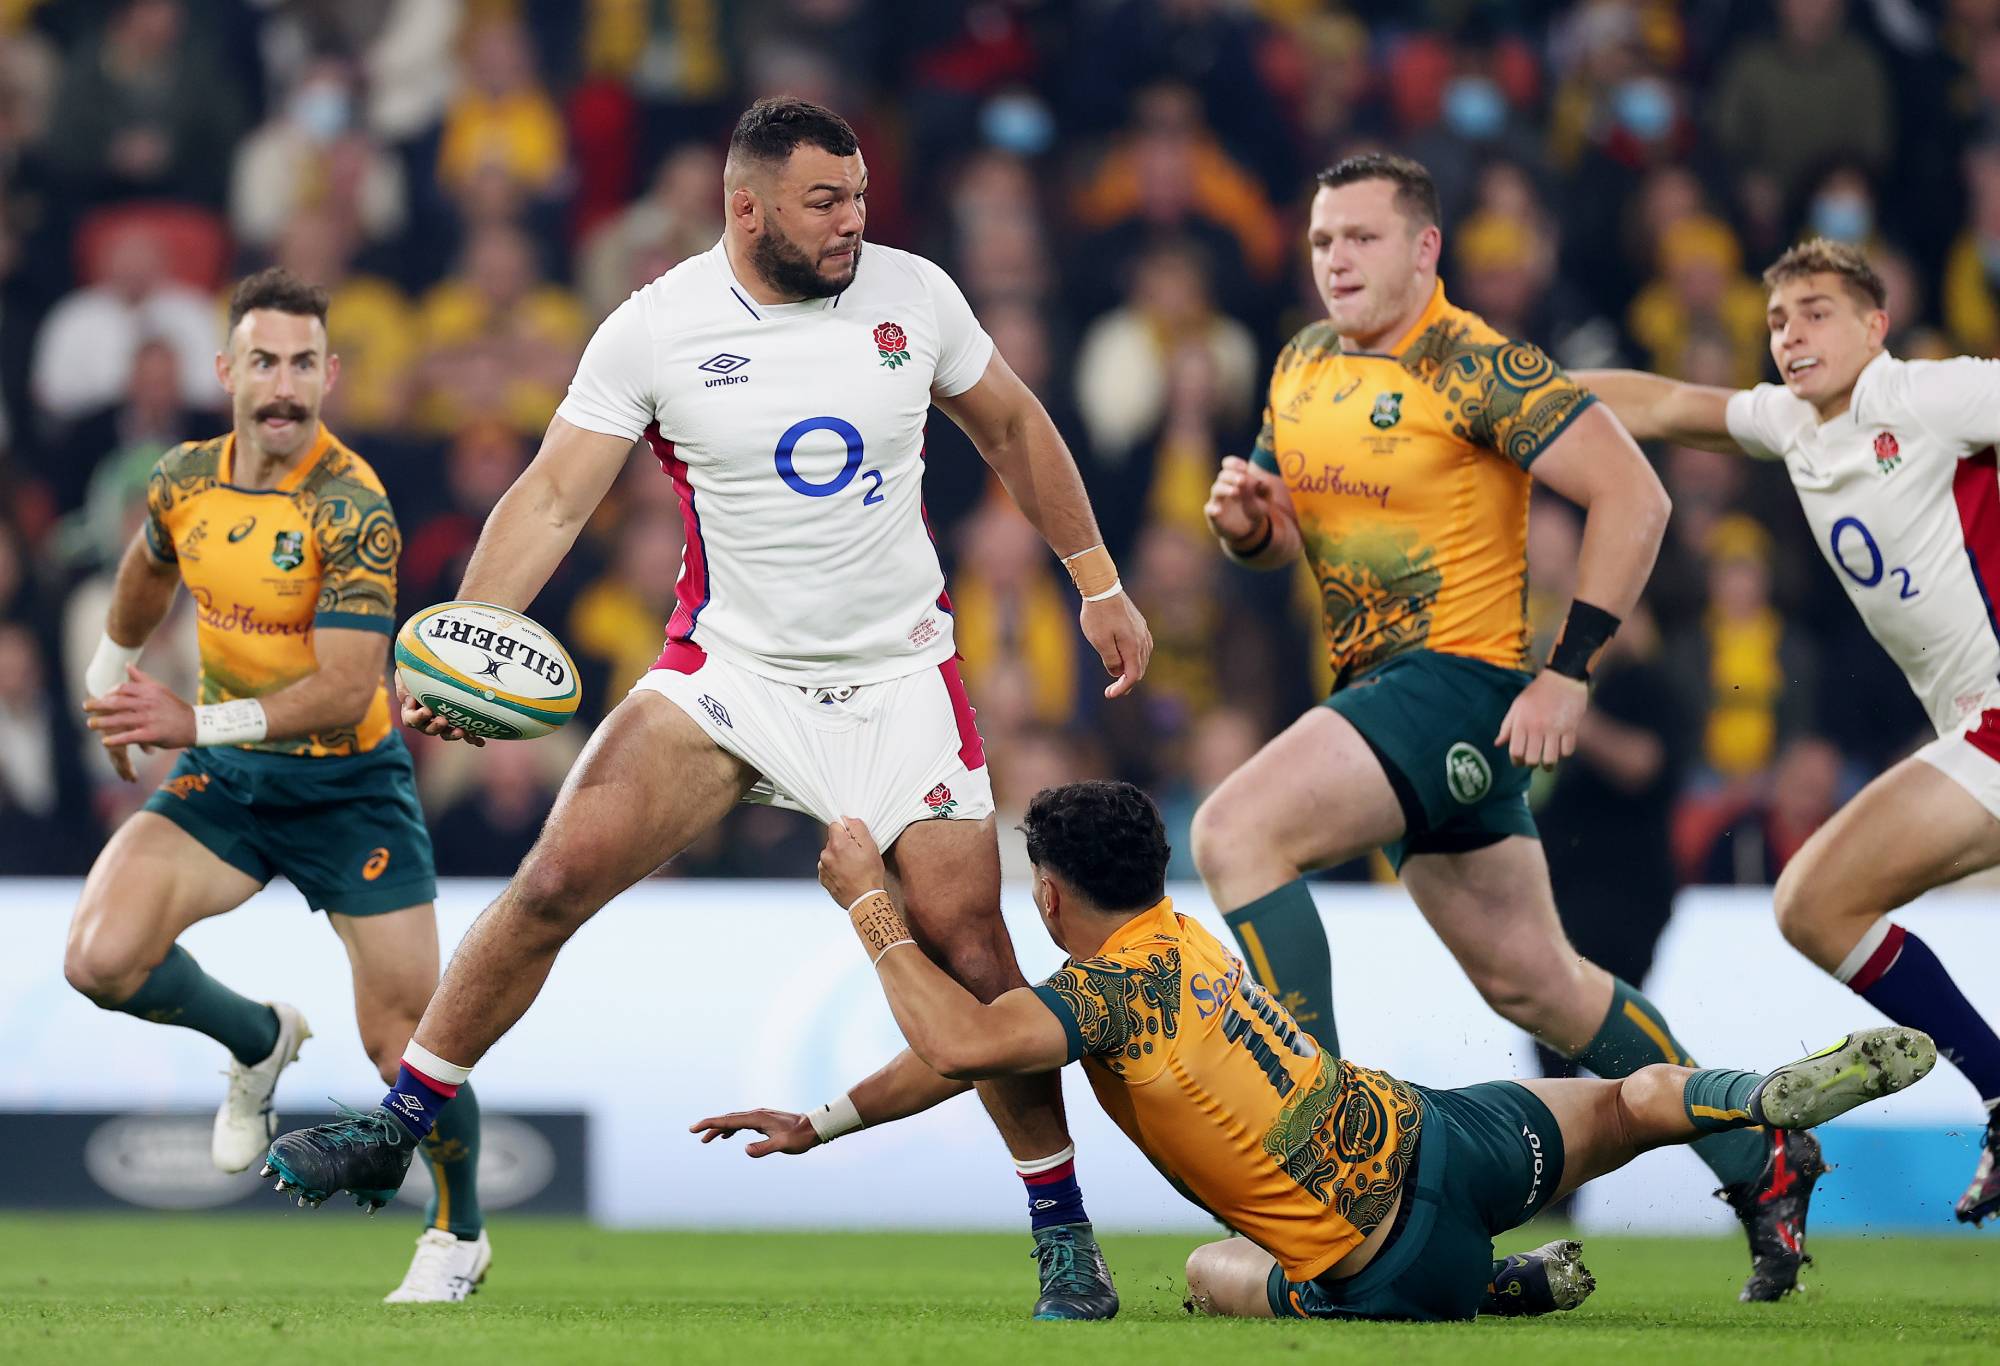 Ellis Genge of England breaks through the contact of Noah Lolesio of Australia during game two of the International Test Match series between the Australia Wallabies and England at Suncorp Stadium on July 09, 2022 in Brisbane, Australia. (Photo by Cameron Spencer/Getty Images)